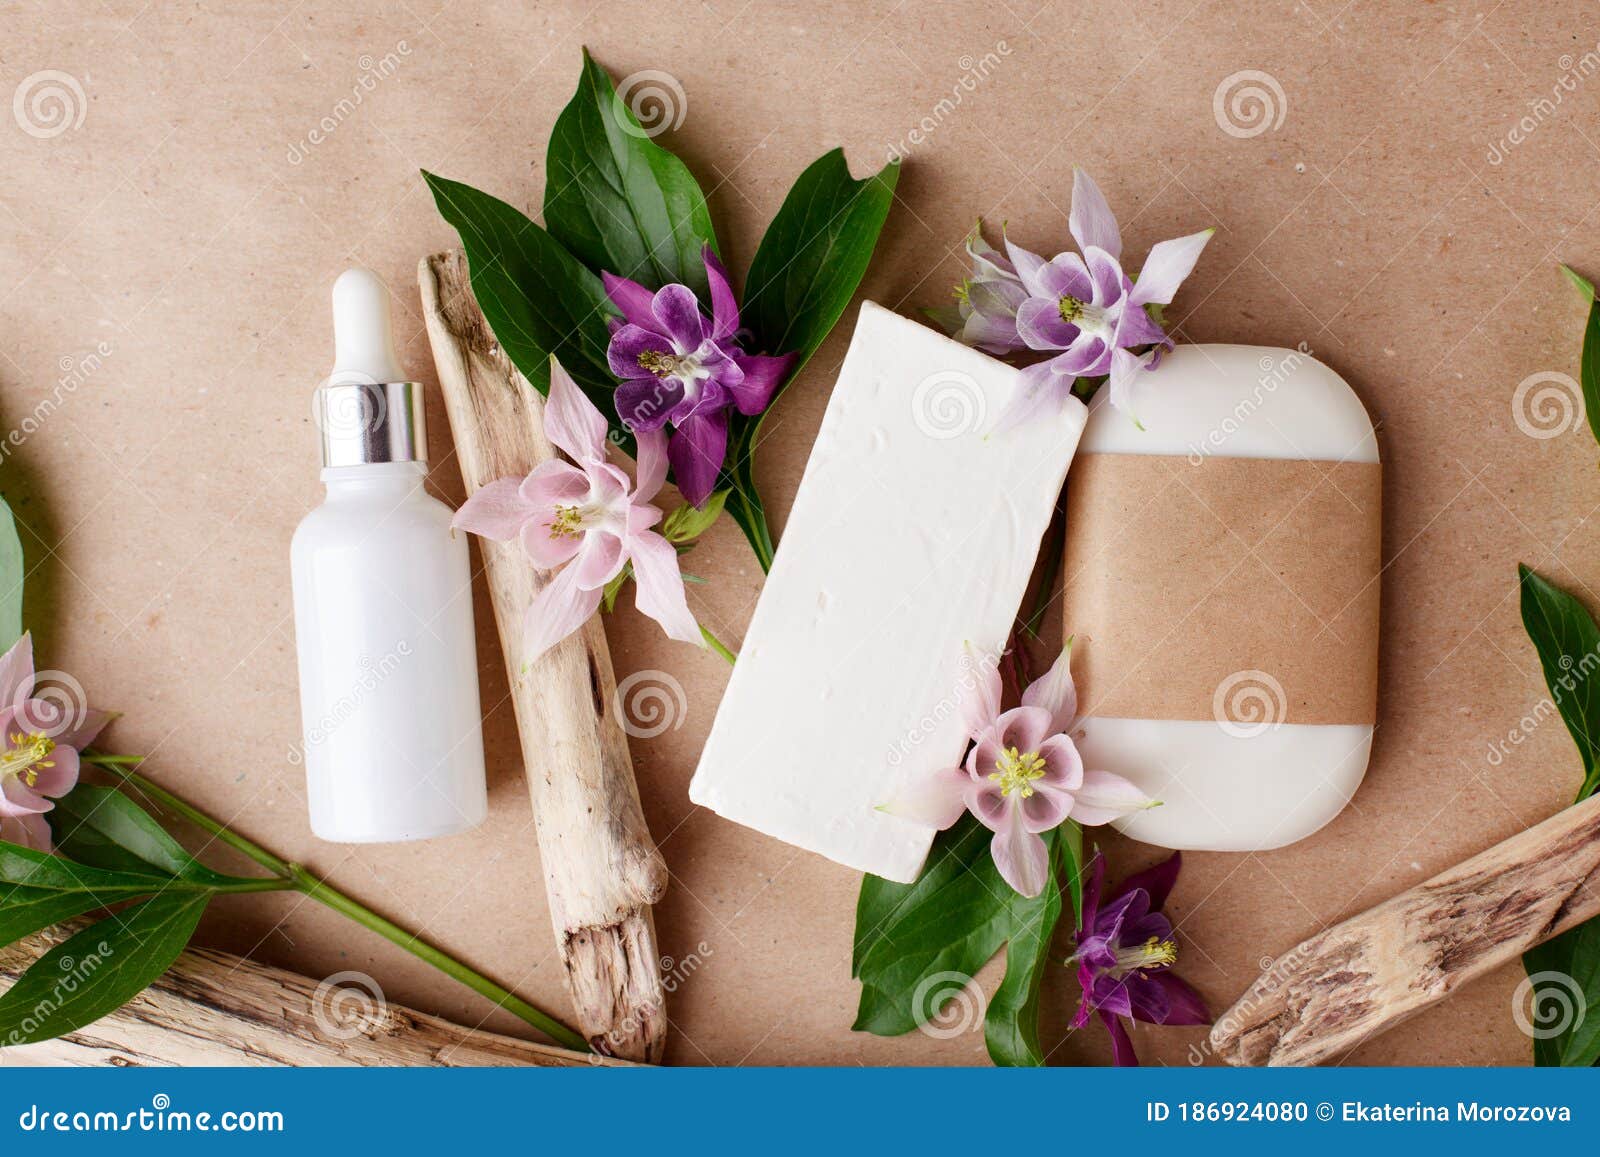 Download Natural Organic Cosmetic Skincare Packaging Mock Up With Leaves And Flowers, Eco-friendly Bio ...